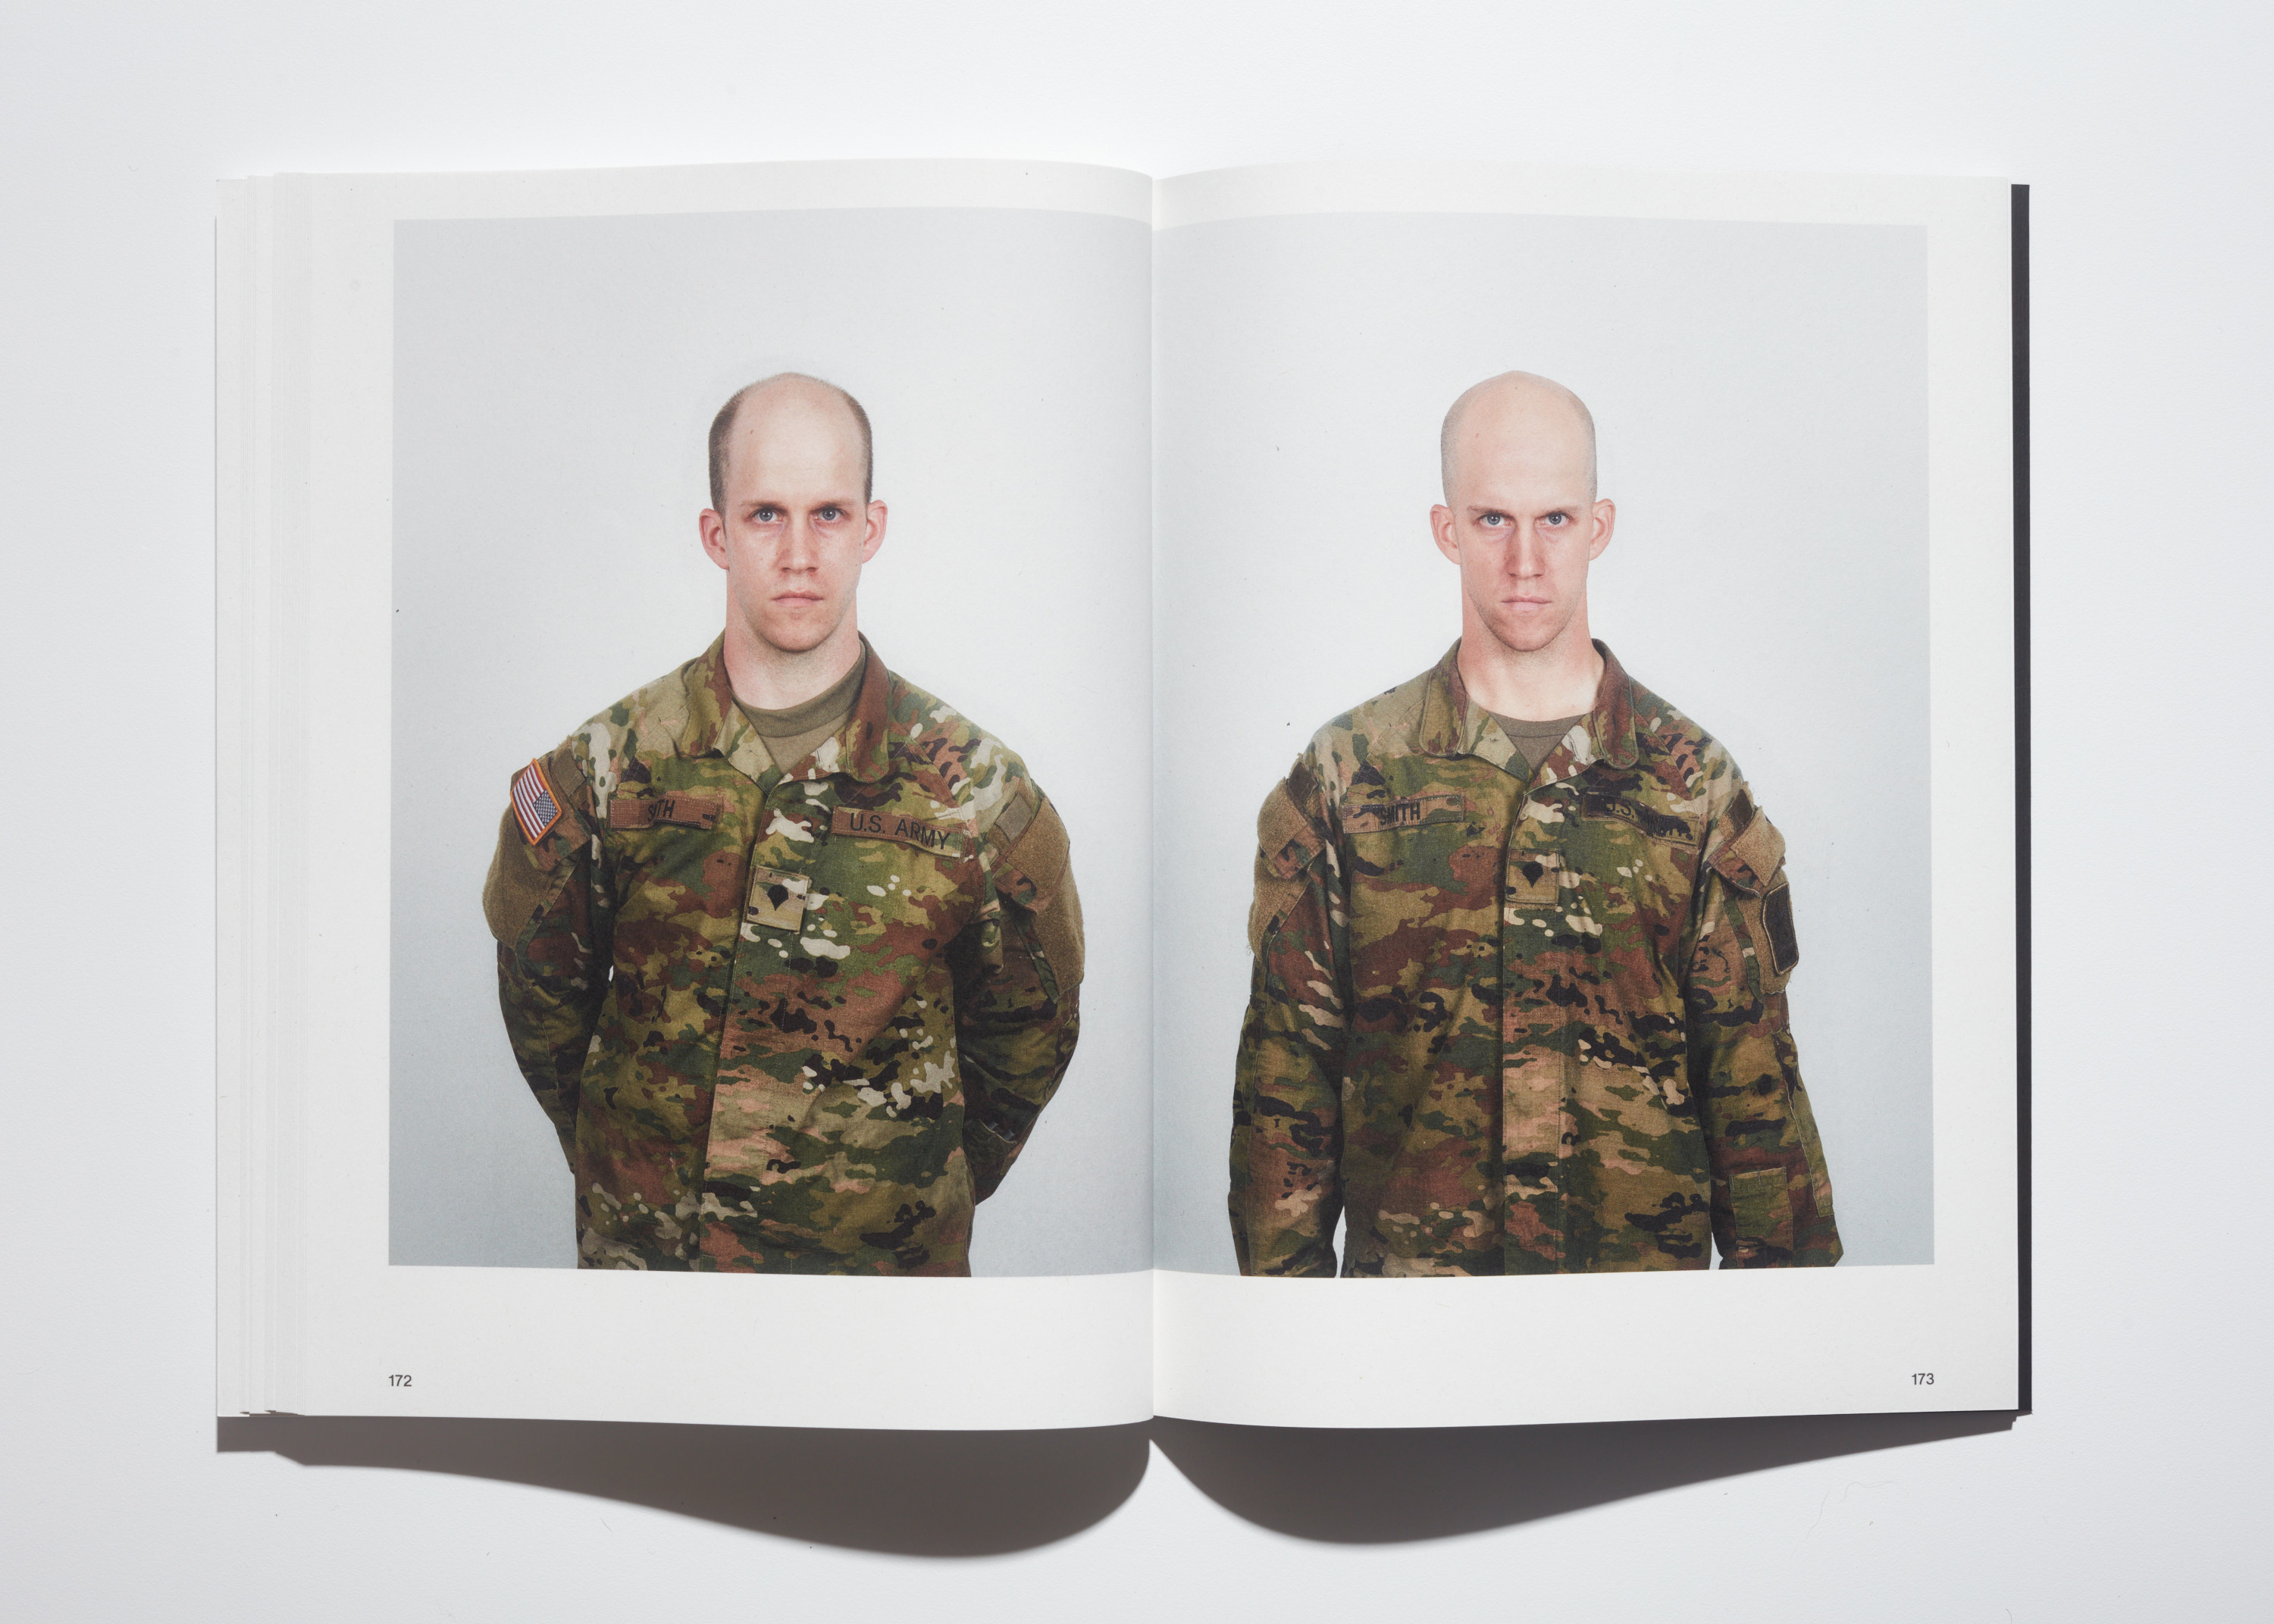 US army recruit Smith before and after training, photographed by Jason Koxvold